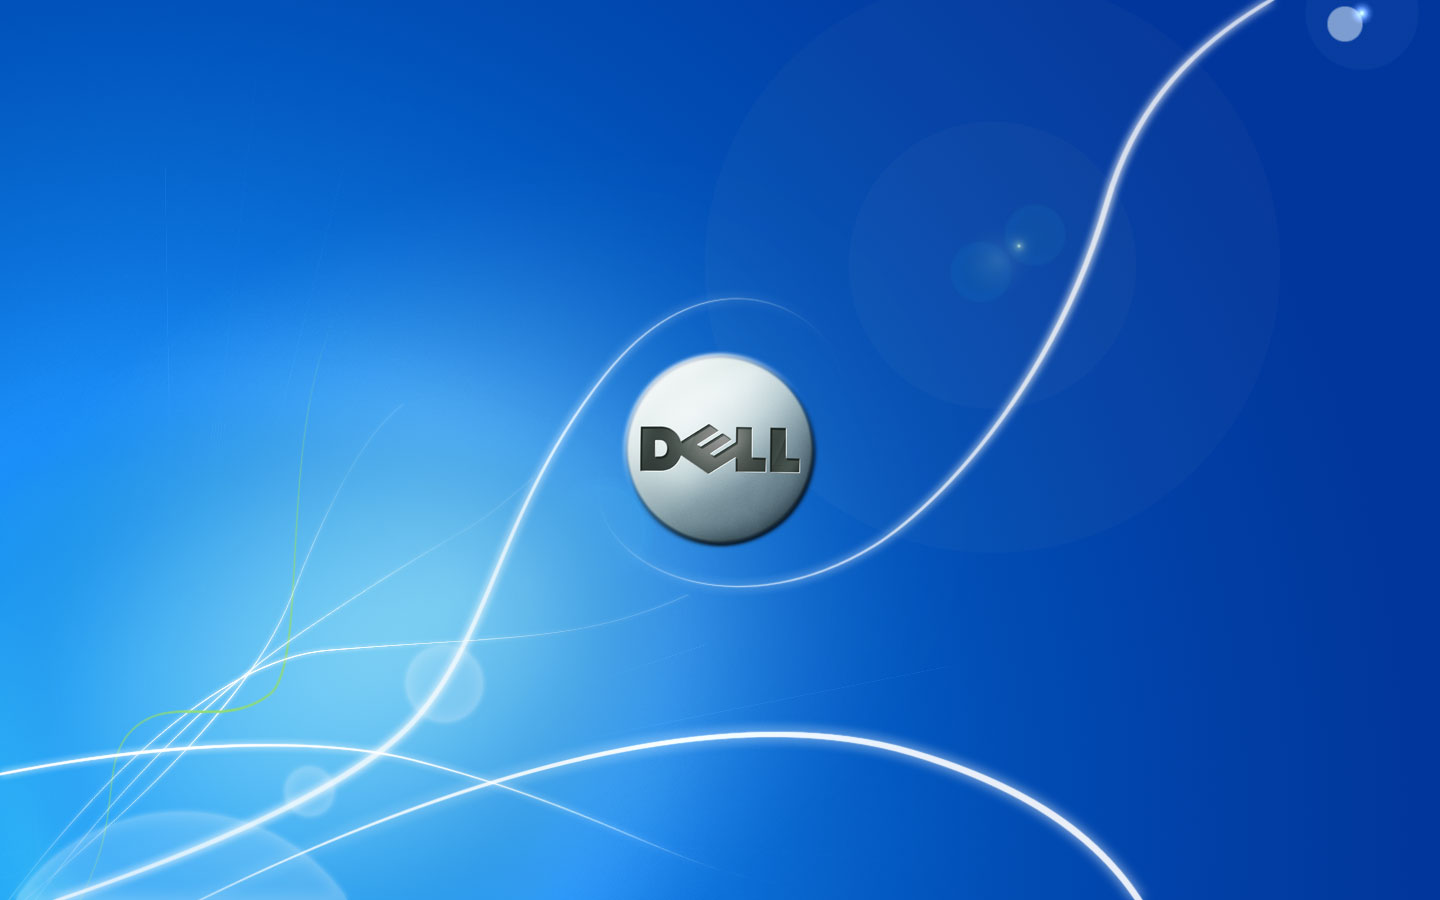 dell wallpaper backgrounds 1440x900